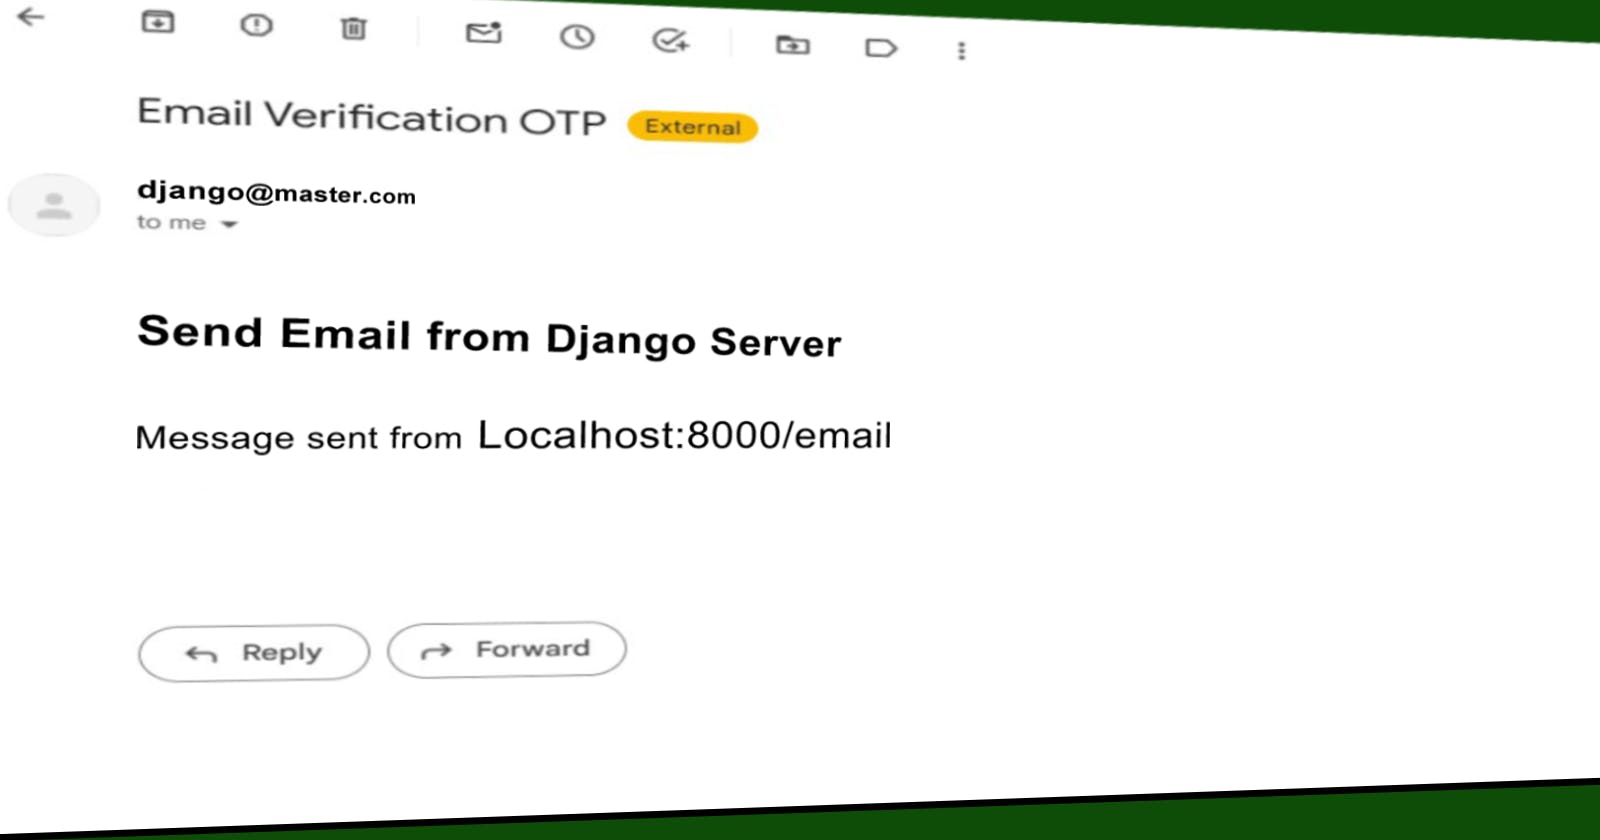 Sending an Email from your Django Server with the Django Master